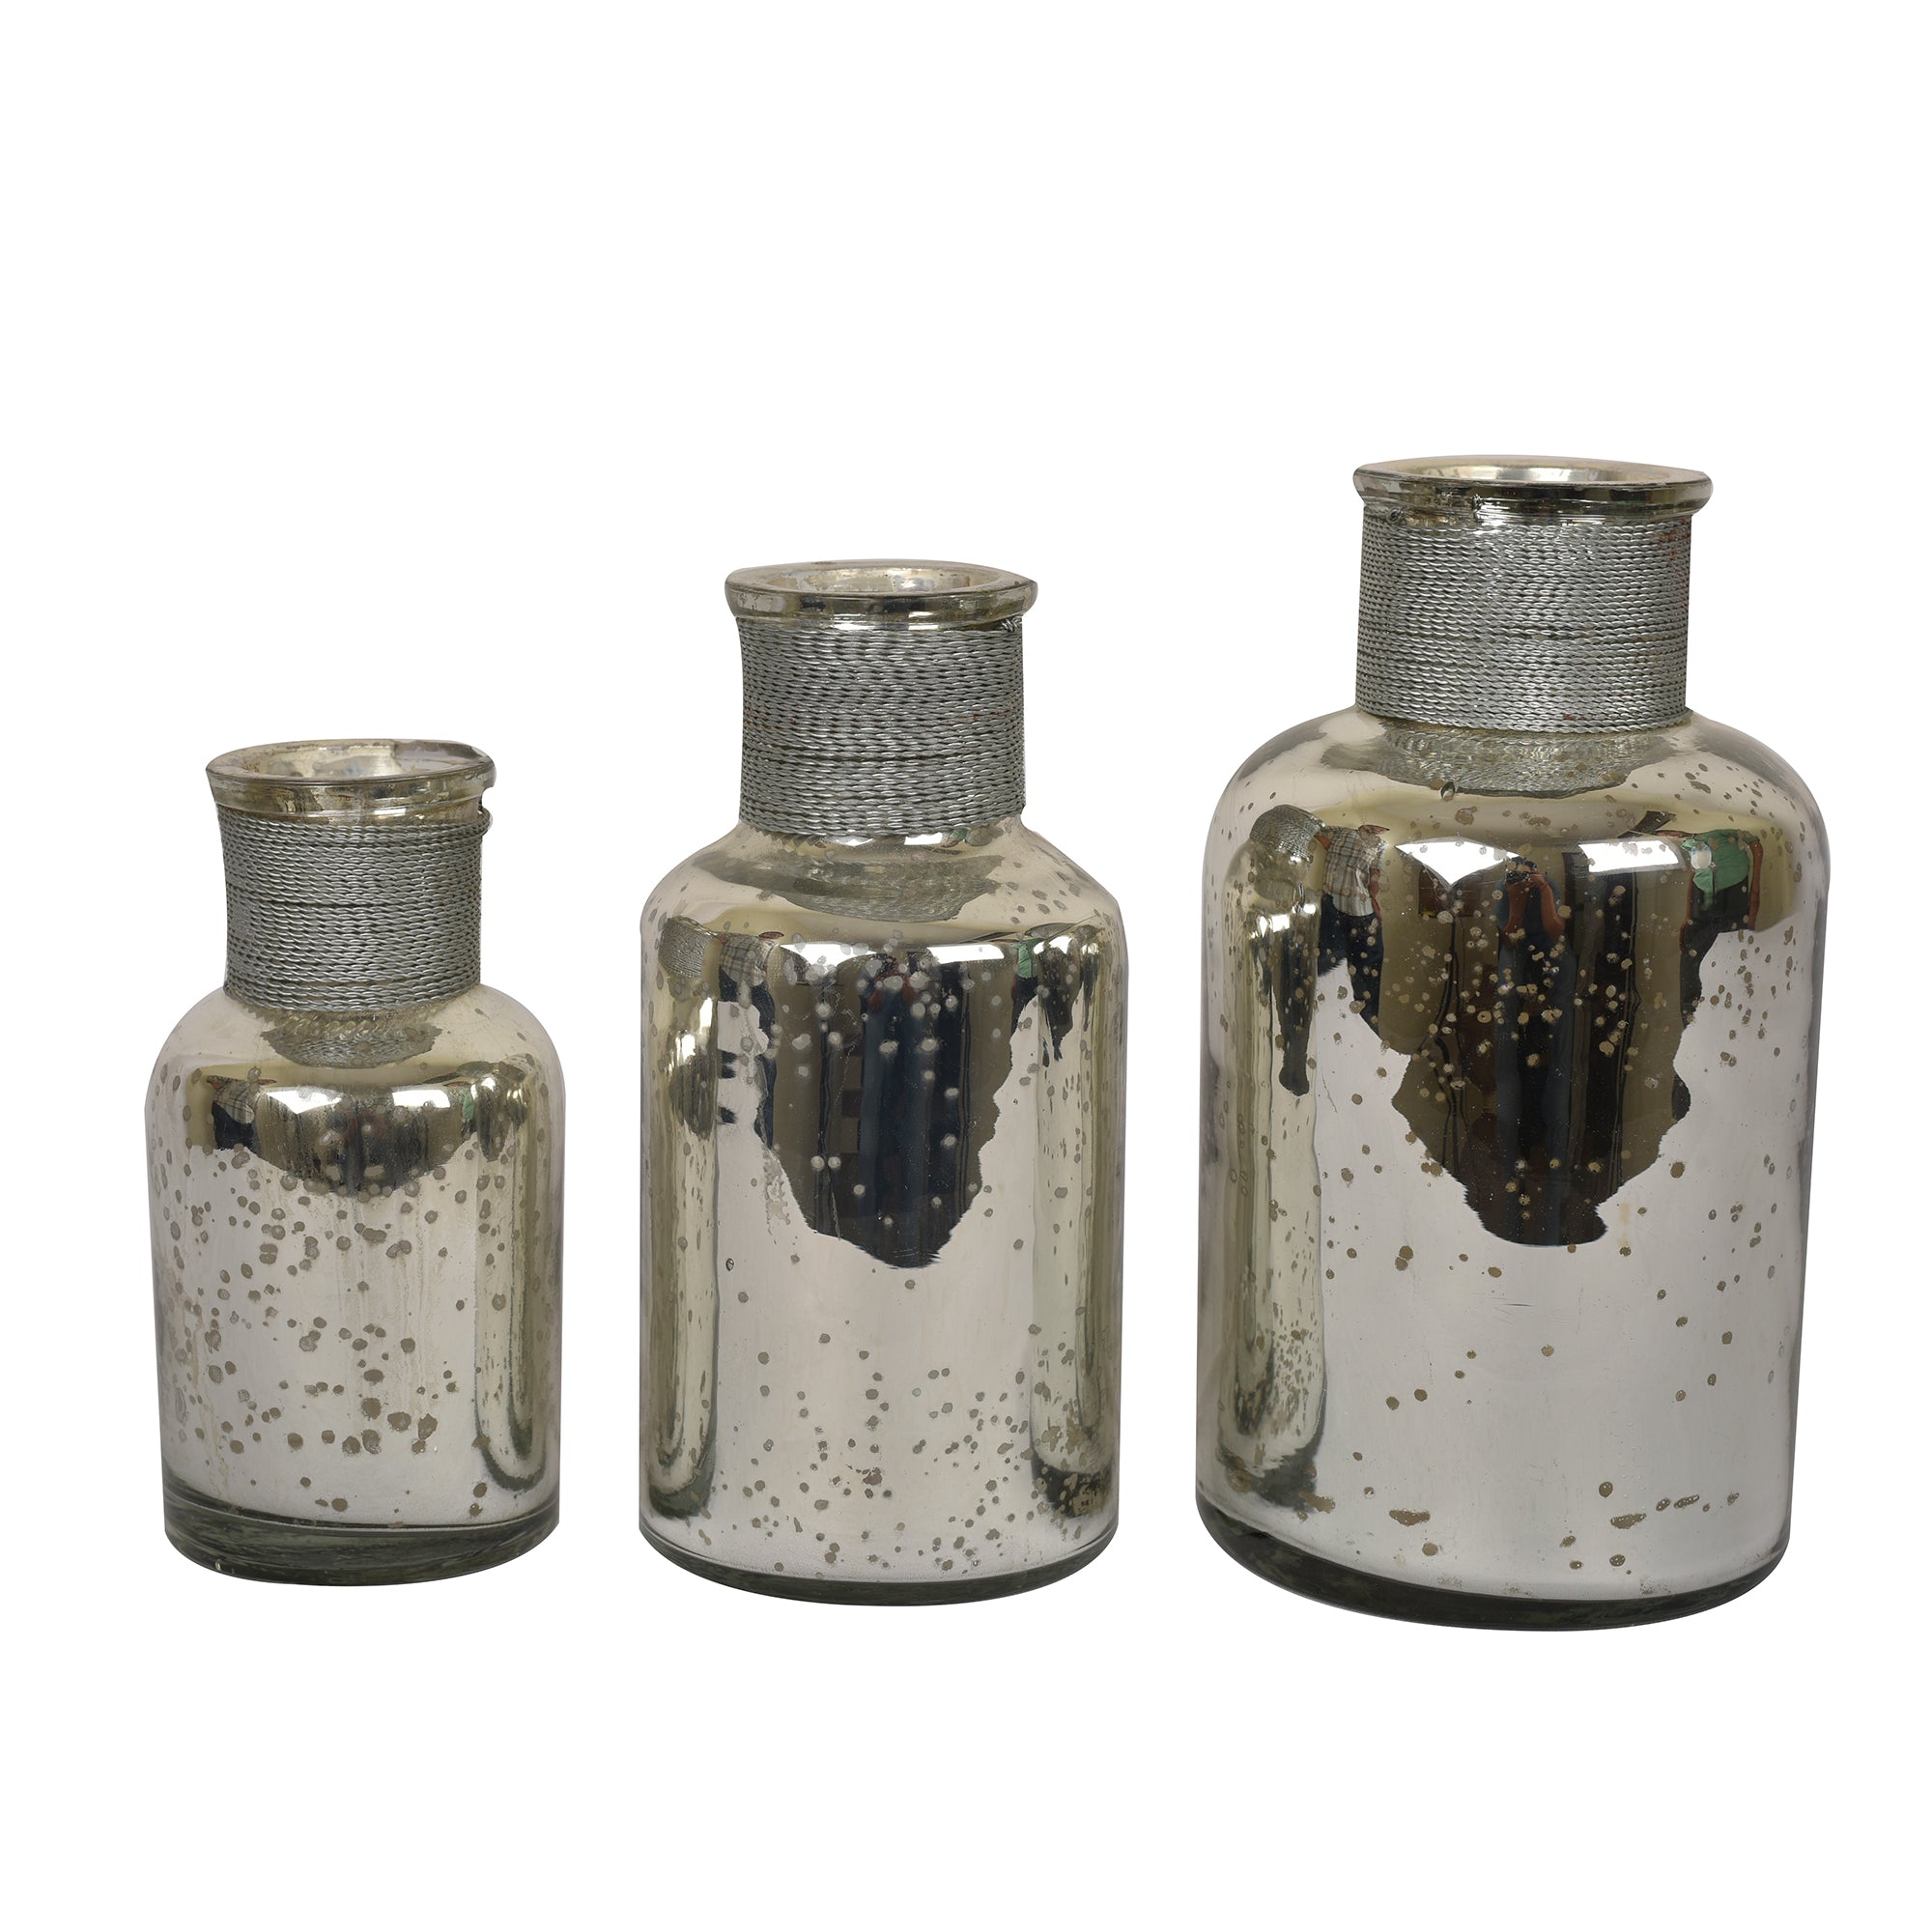 Lustre Glass Tonic Bottle (Set of 3)- 8 inches, 7 inches and 6 inches tall